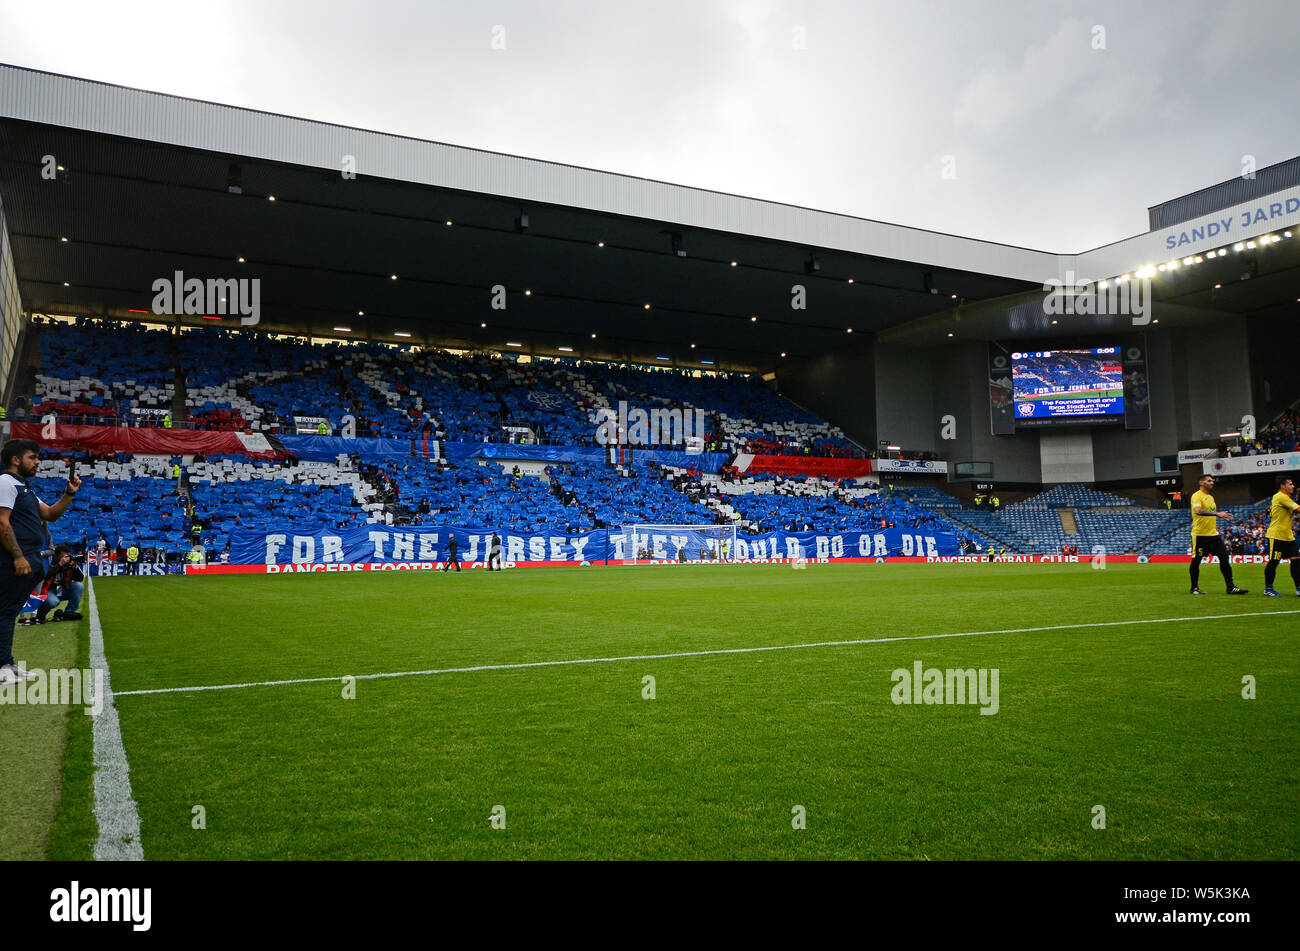 GLASGOW, SCOTLAND - JULY 18, 2019: Rangers ultras display a tifo prior to the 2nd leg of the 2019/20 UEFA Europa League First Qualifying Round game between Rangers FC (Scotland) and St Joseph's FC (Gibraltar) at Ibrox Park. Stock Photo